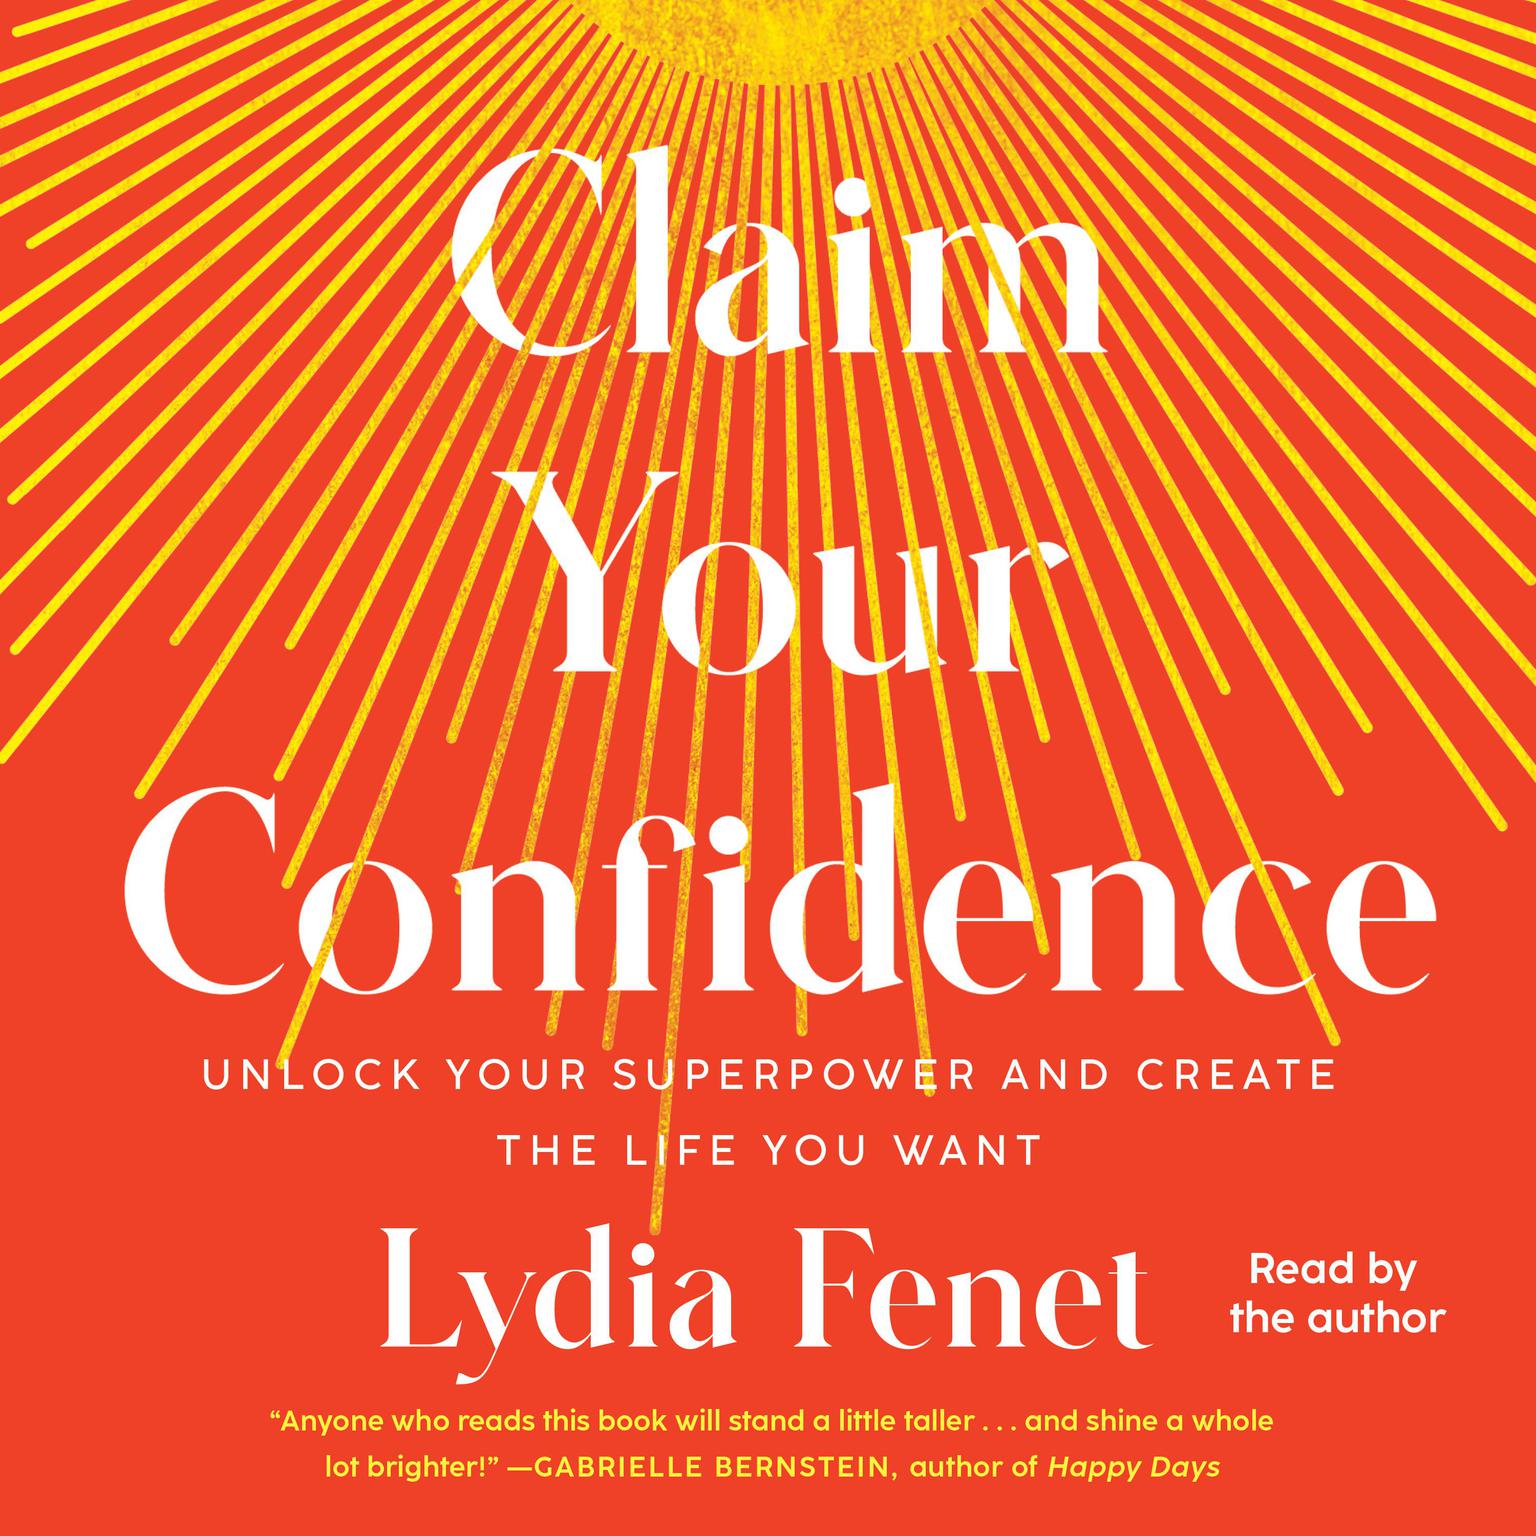 Claim Your Confidence: Unlock Your Superpower and Create the Life You Want Audiobook, by Lydia Fenet